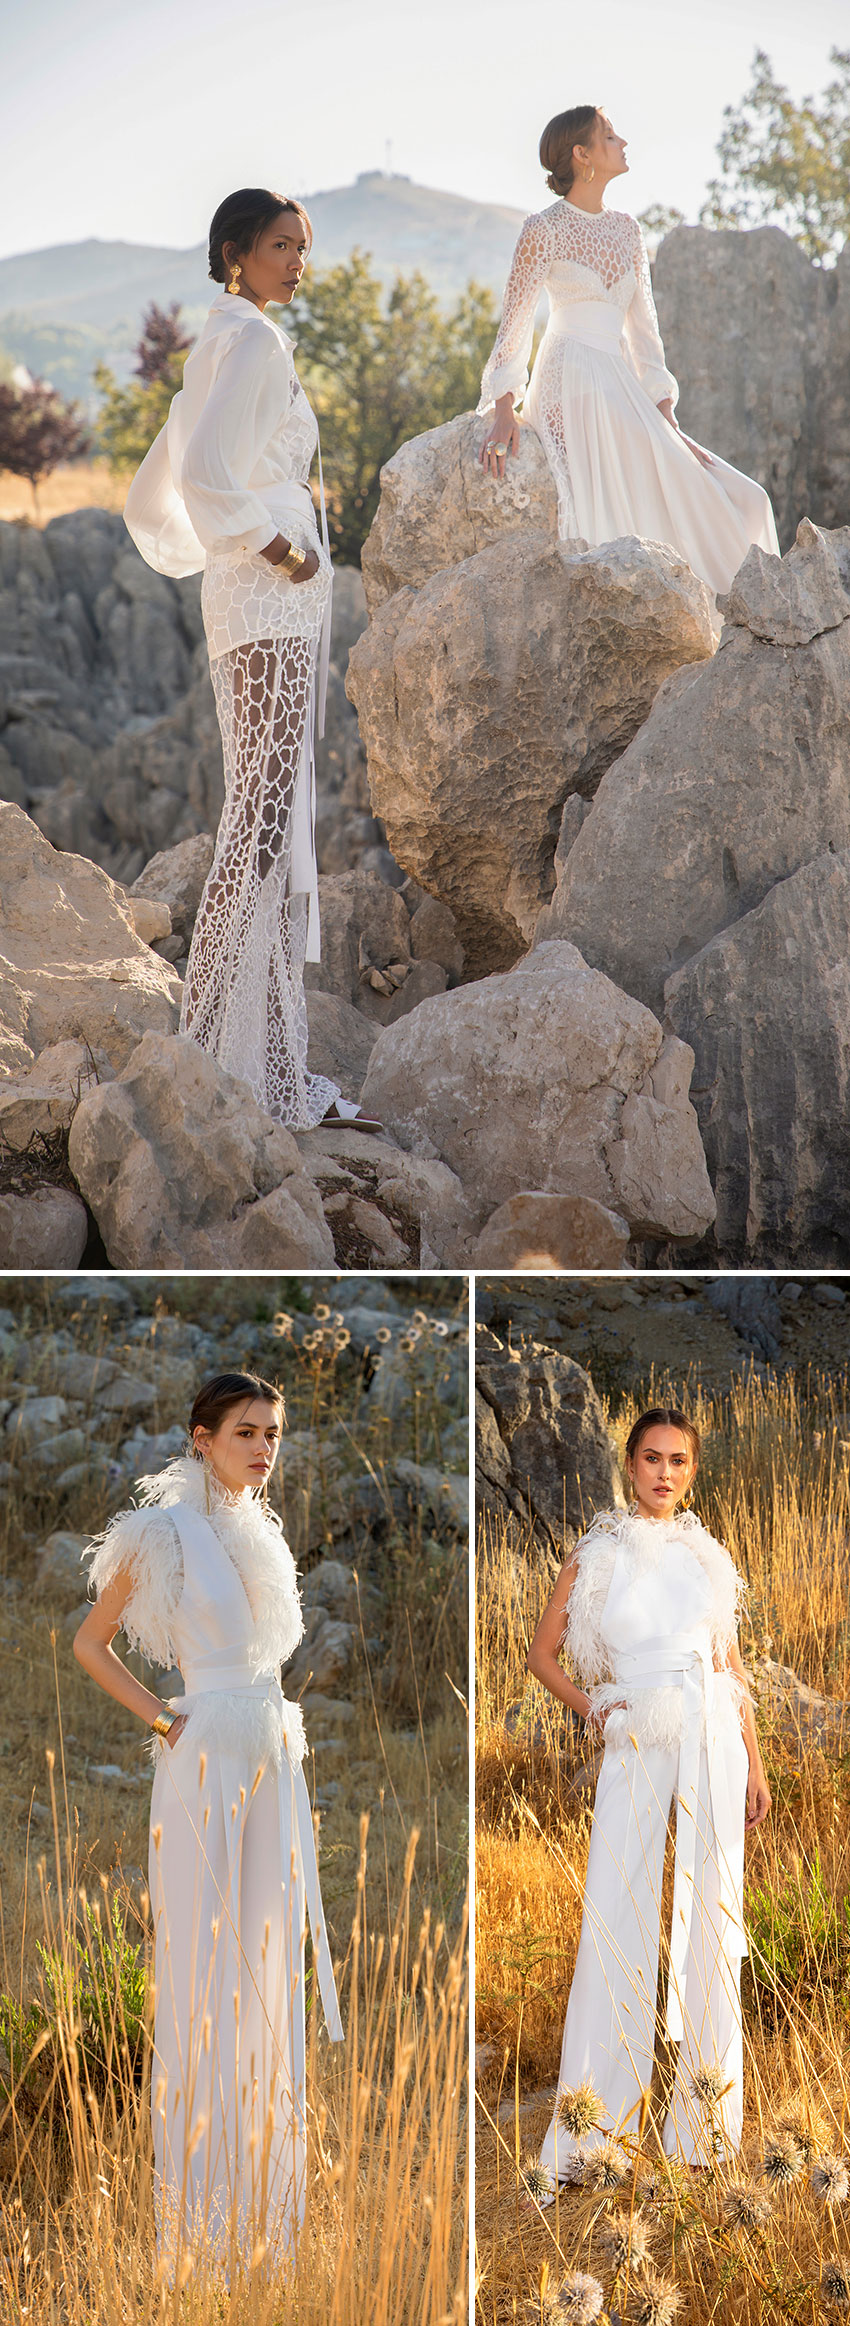 Elie Saab Ready-to-wear spring summer 2021 featured in Perfect Wedding Magazine